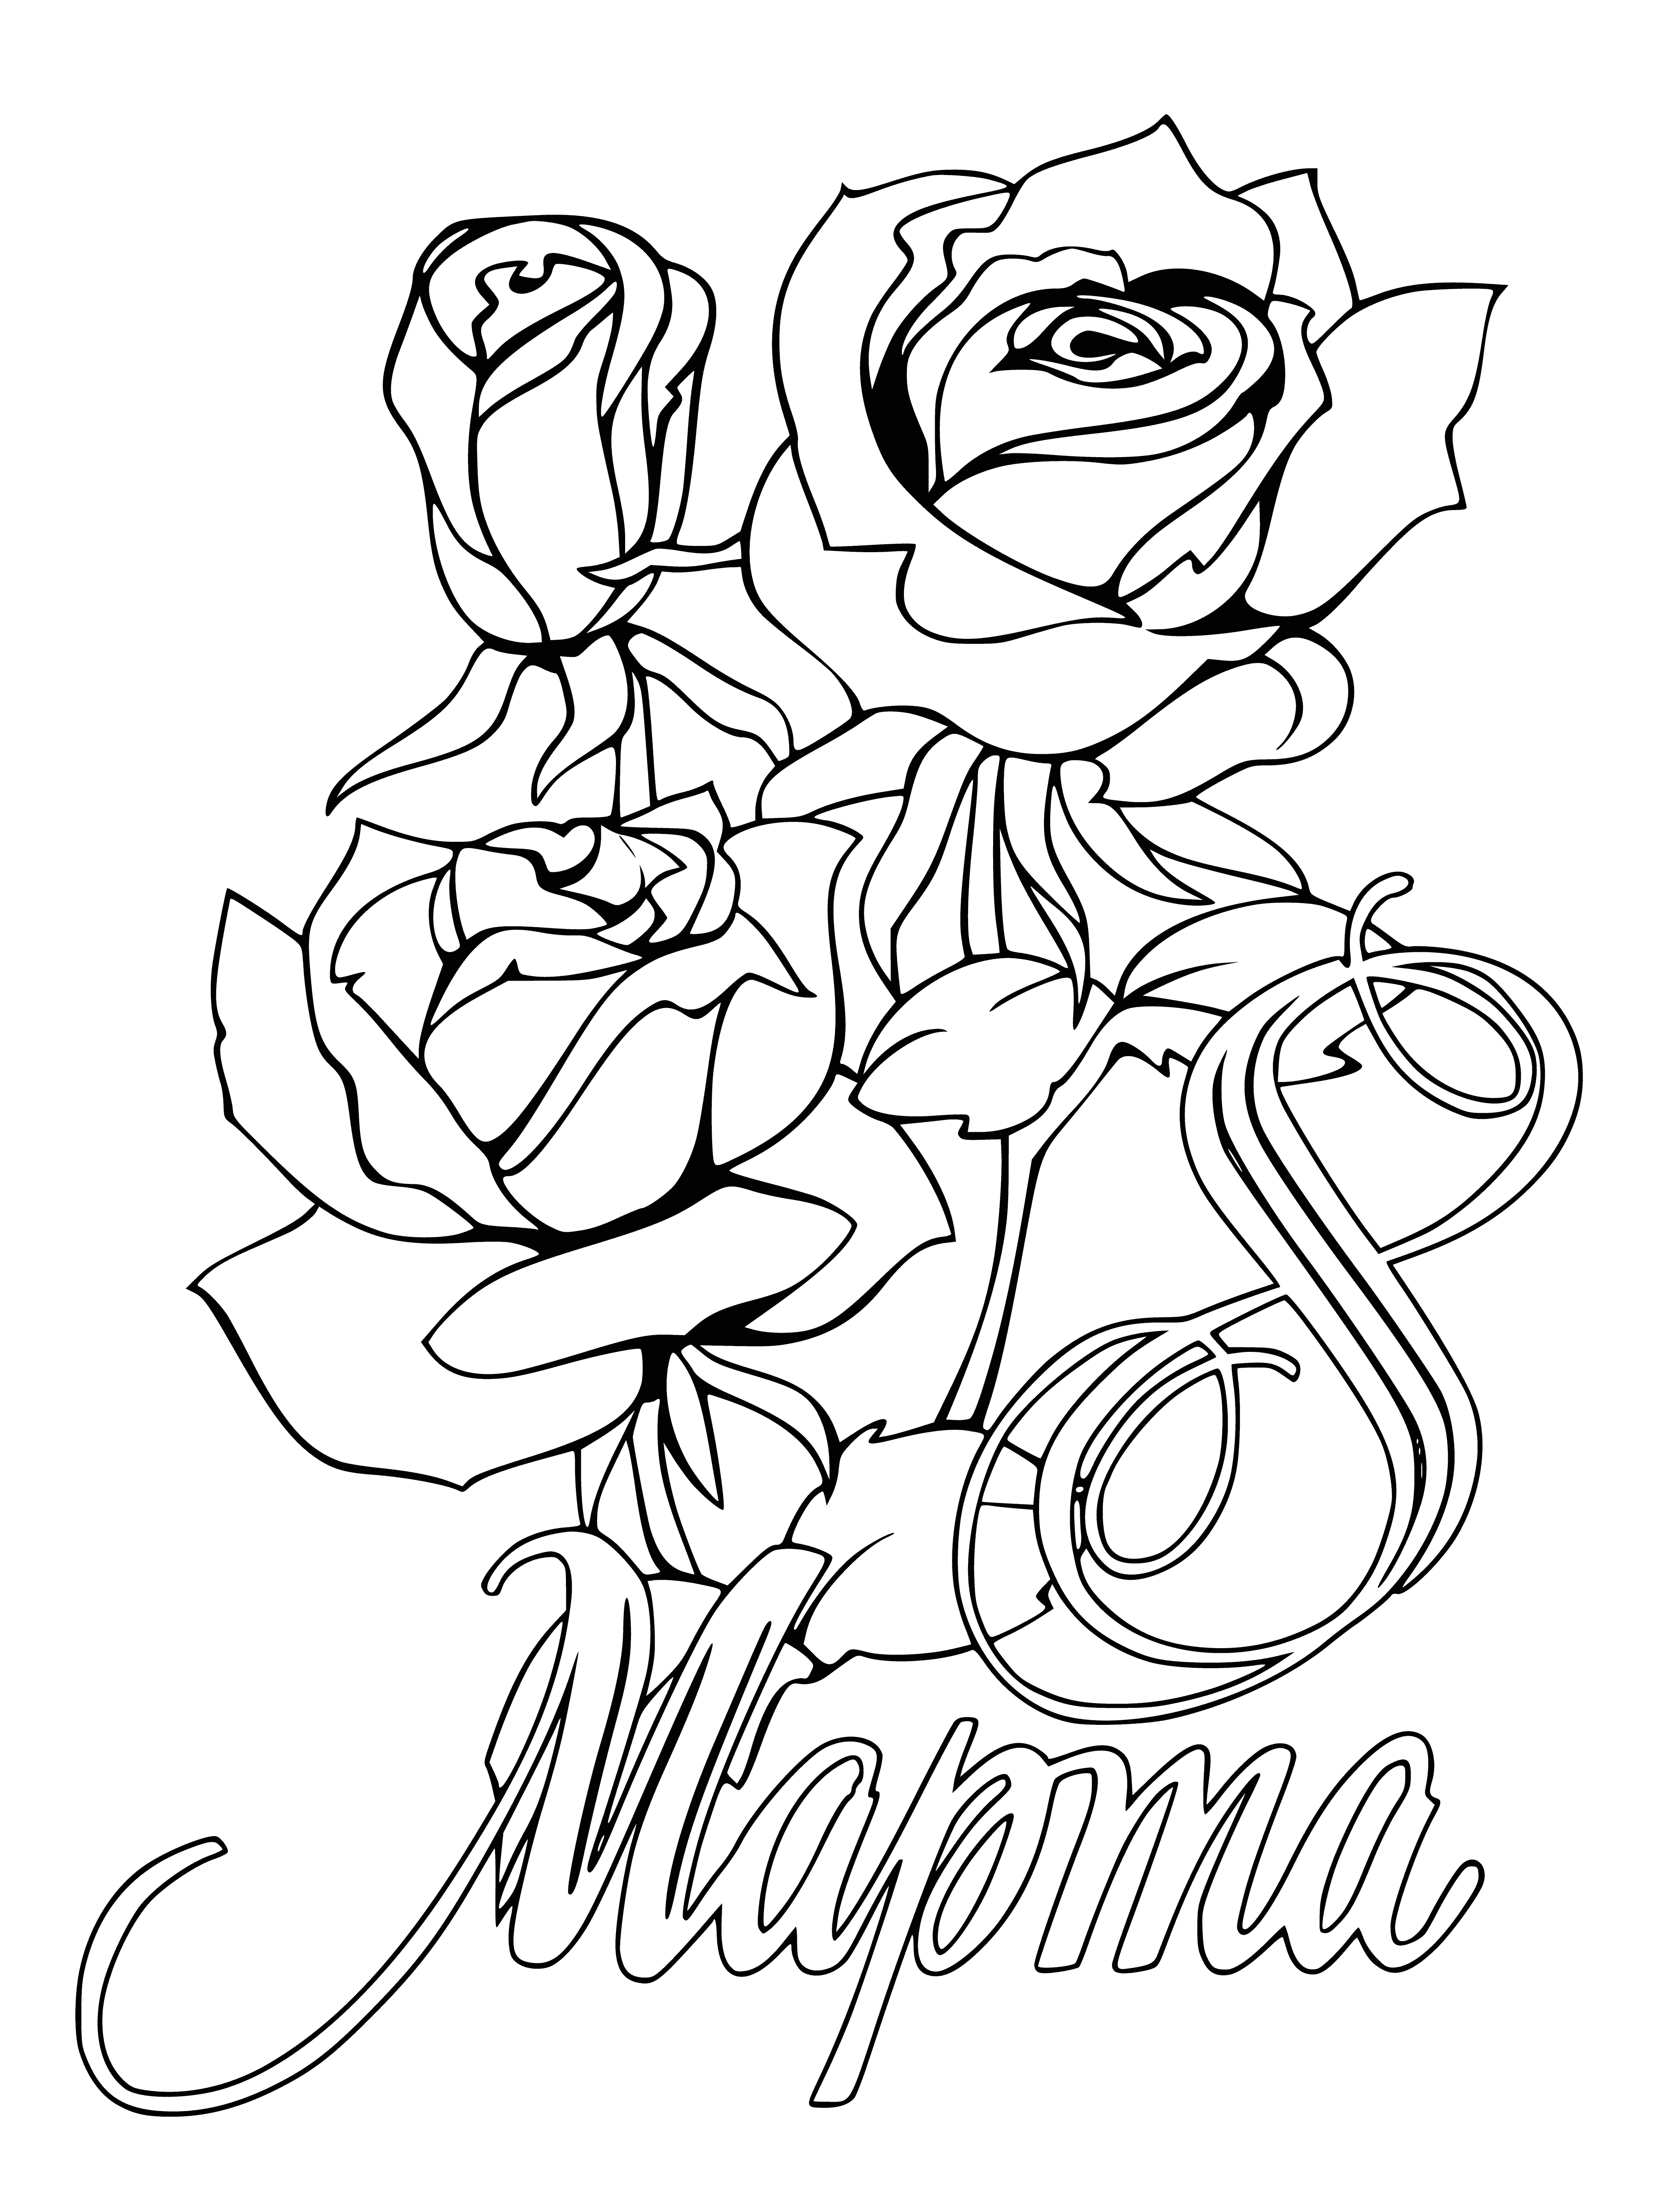 coloring page: Two people holding red roses, smiling, showing closeness and love. #love #roses #smiles